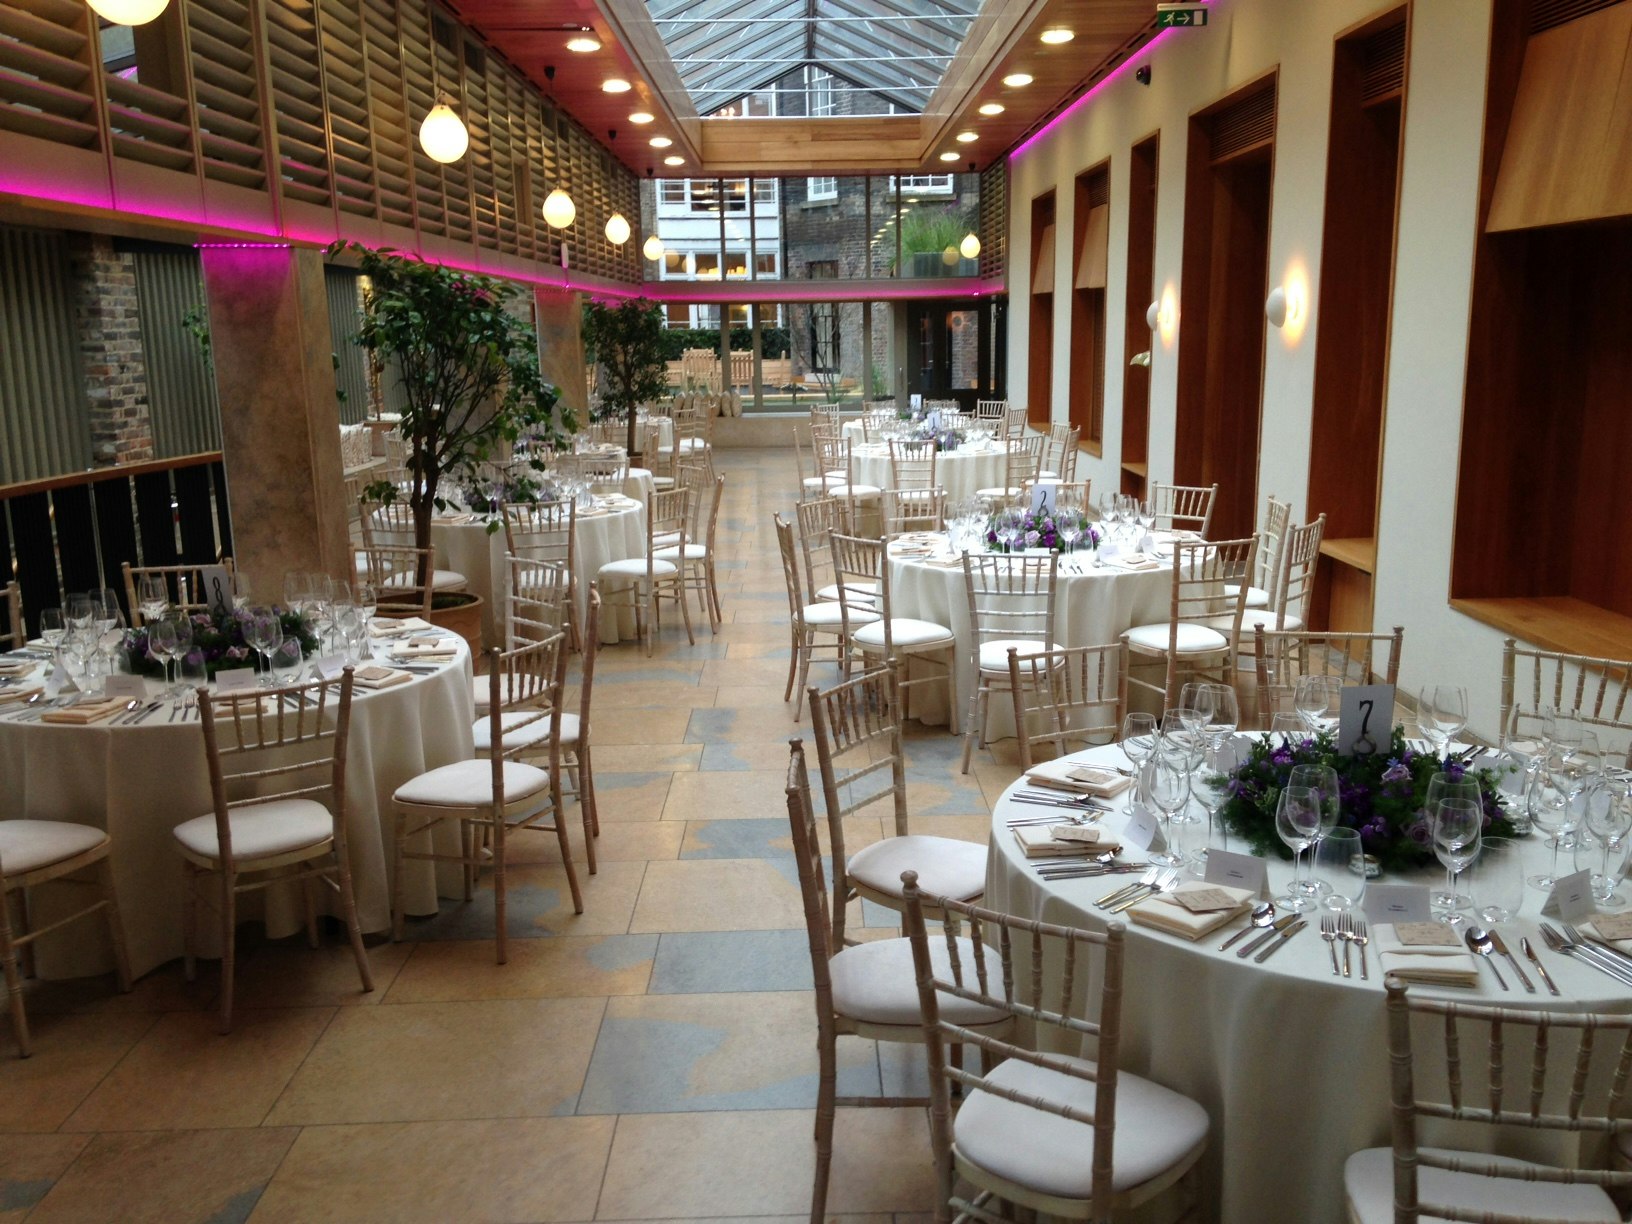 Affordable Private Dining Rooms Venues in London - No.11 Cavendish Square